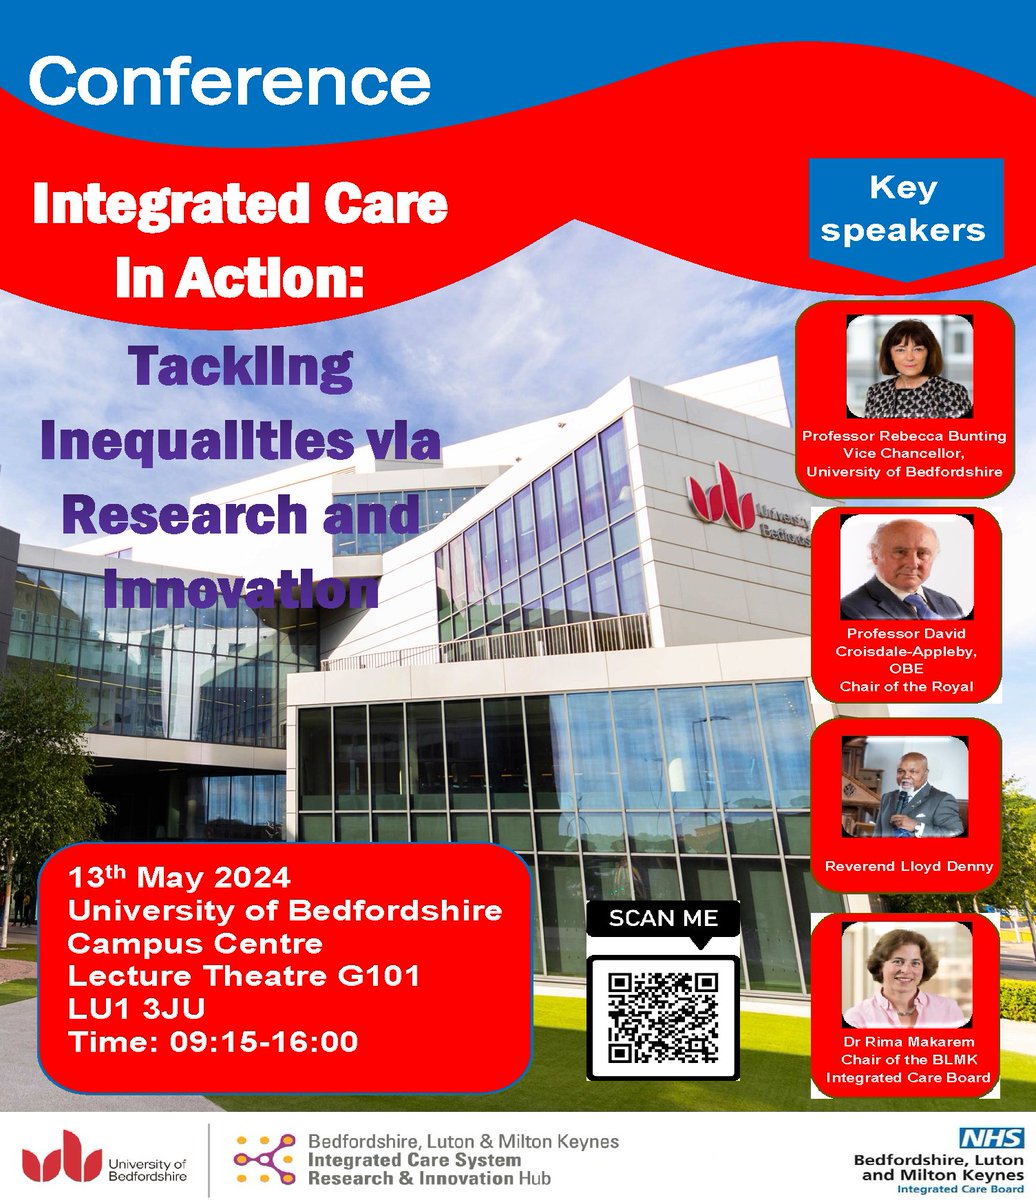 💬 The @uniofbeds has joined forces with @BLMKHealthCare to host an annual conference focused on tackling inequalities in integrated care through #research & #innovation. Find out more & how to register to attend for FREE: beds.ac.uk/news/2024/apri… 👈